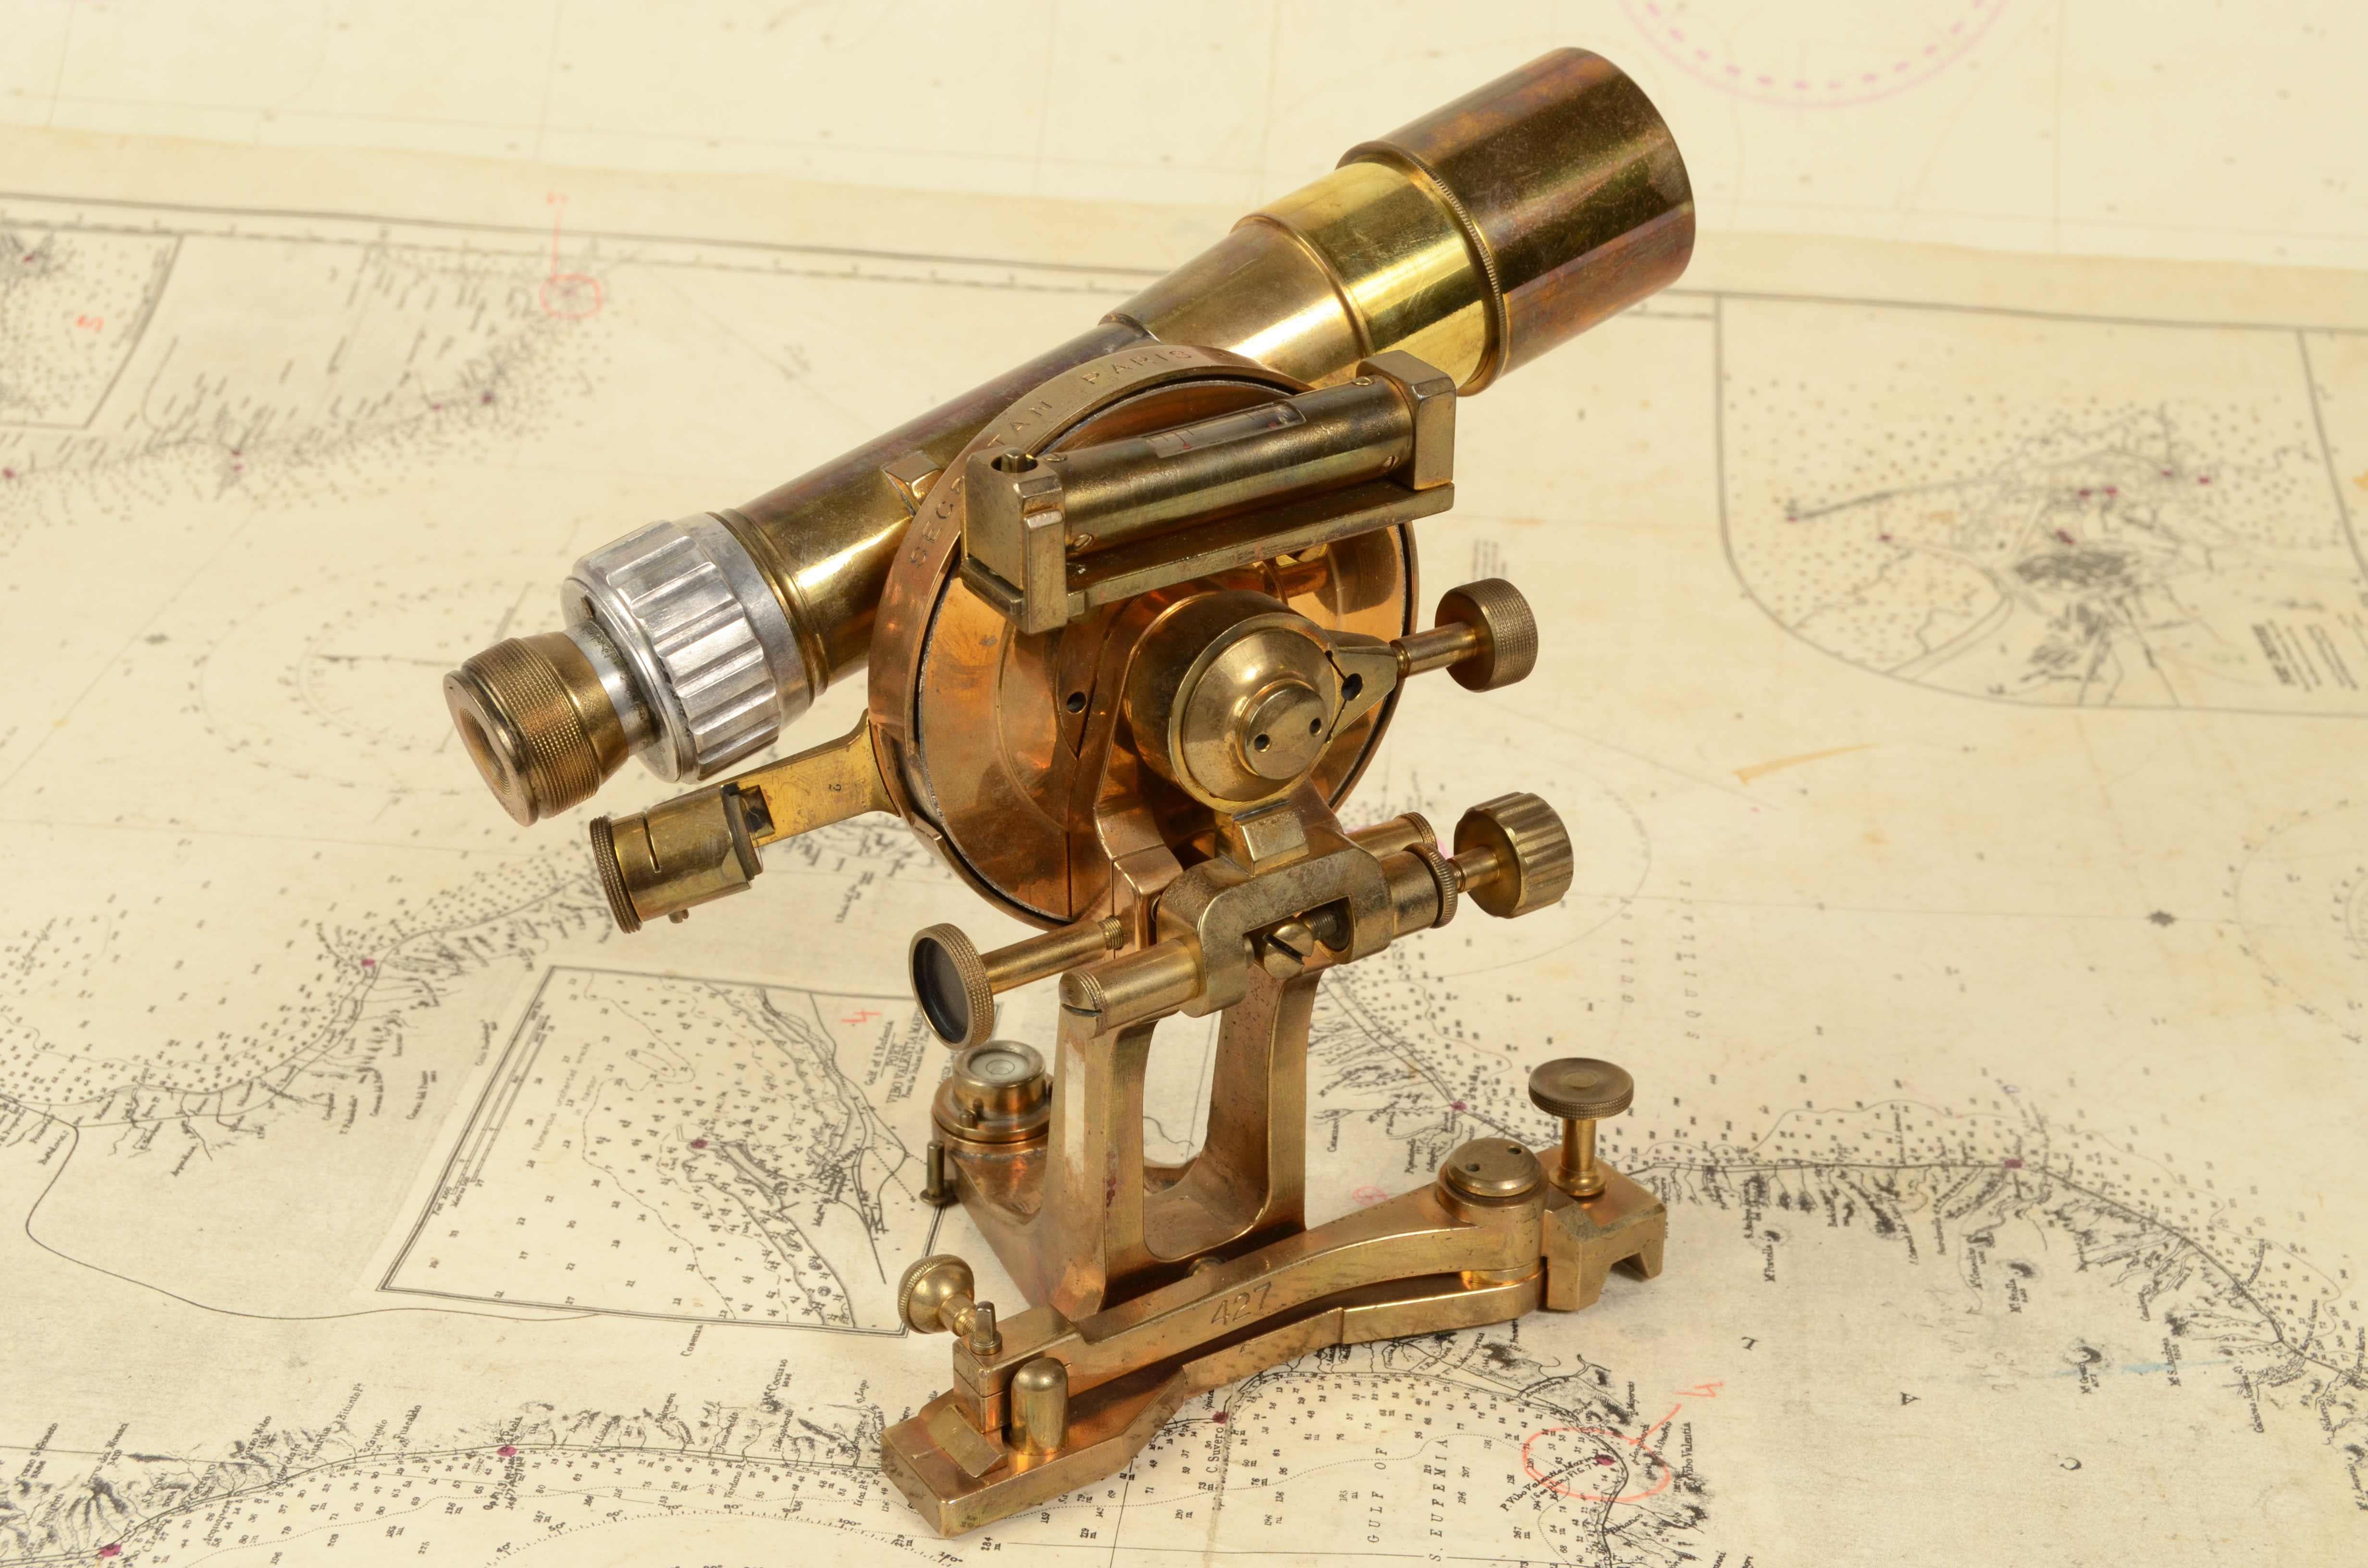 Telescope diopter for praetorian tablet signed Secretan Paris n. 3733 from the early 1900s. Praetorian Tablet: the name derives from Pretorius, a professor in Altdorf, who conceived it in 1590. Used to trace medium and small scale maps, as it allows